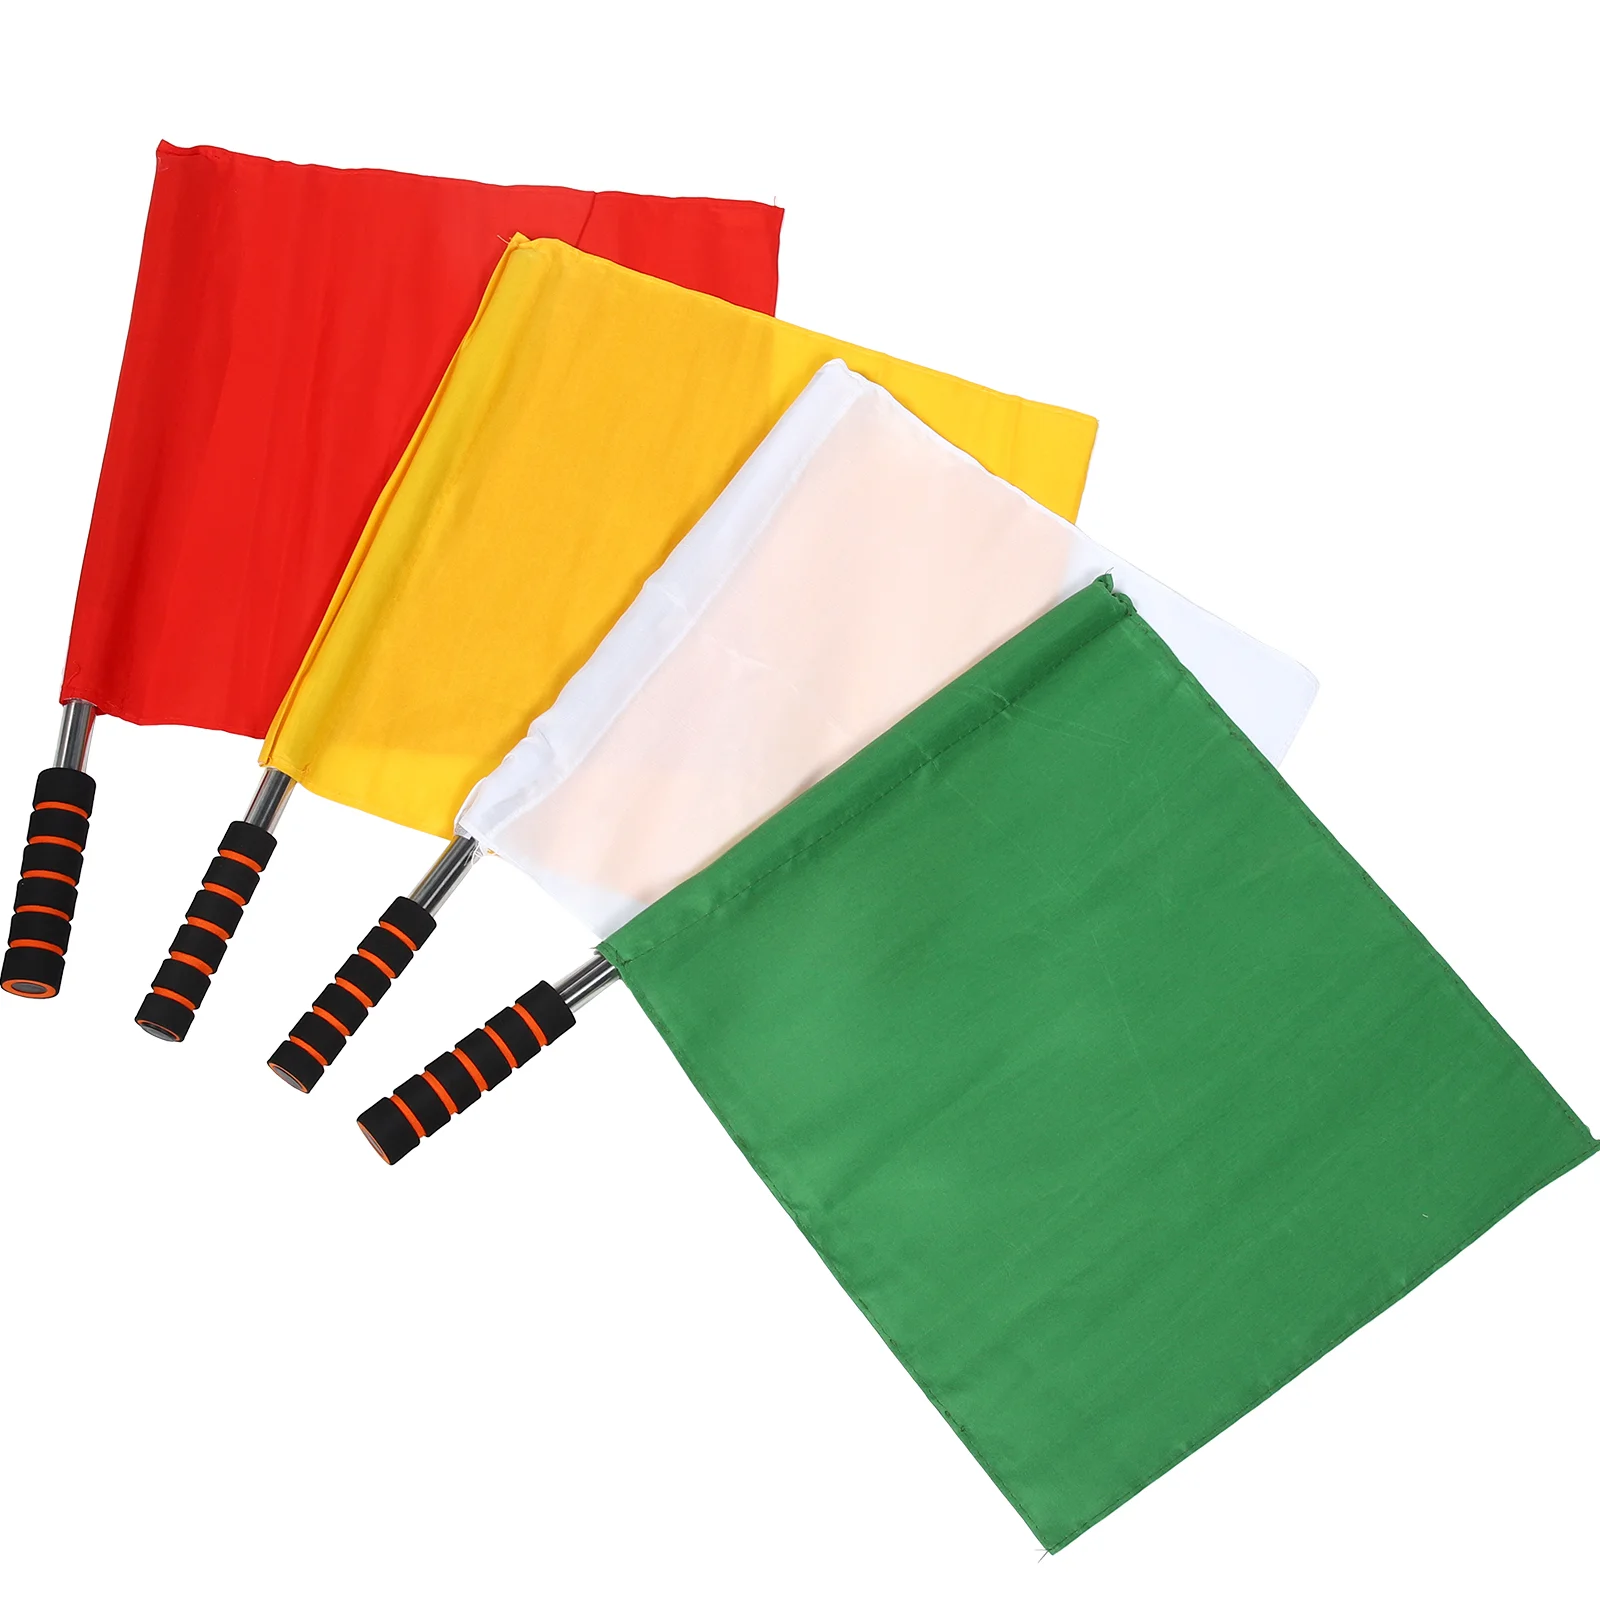 

Referee Flag Small Signal Flags Warning Soccer Colored Football Match Hand Waving